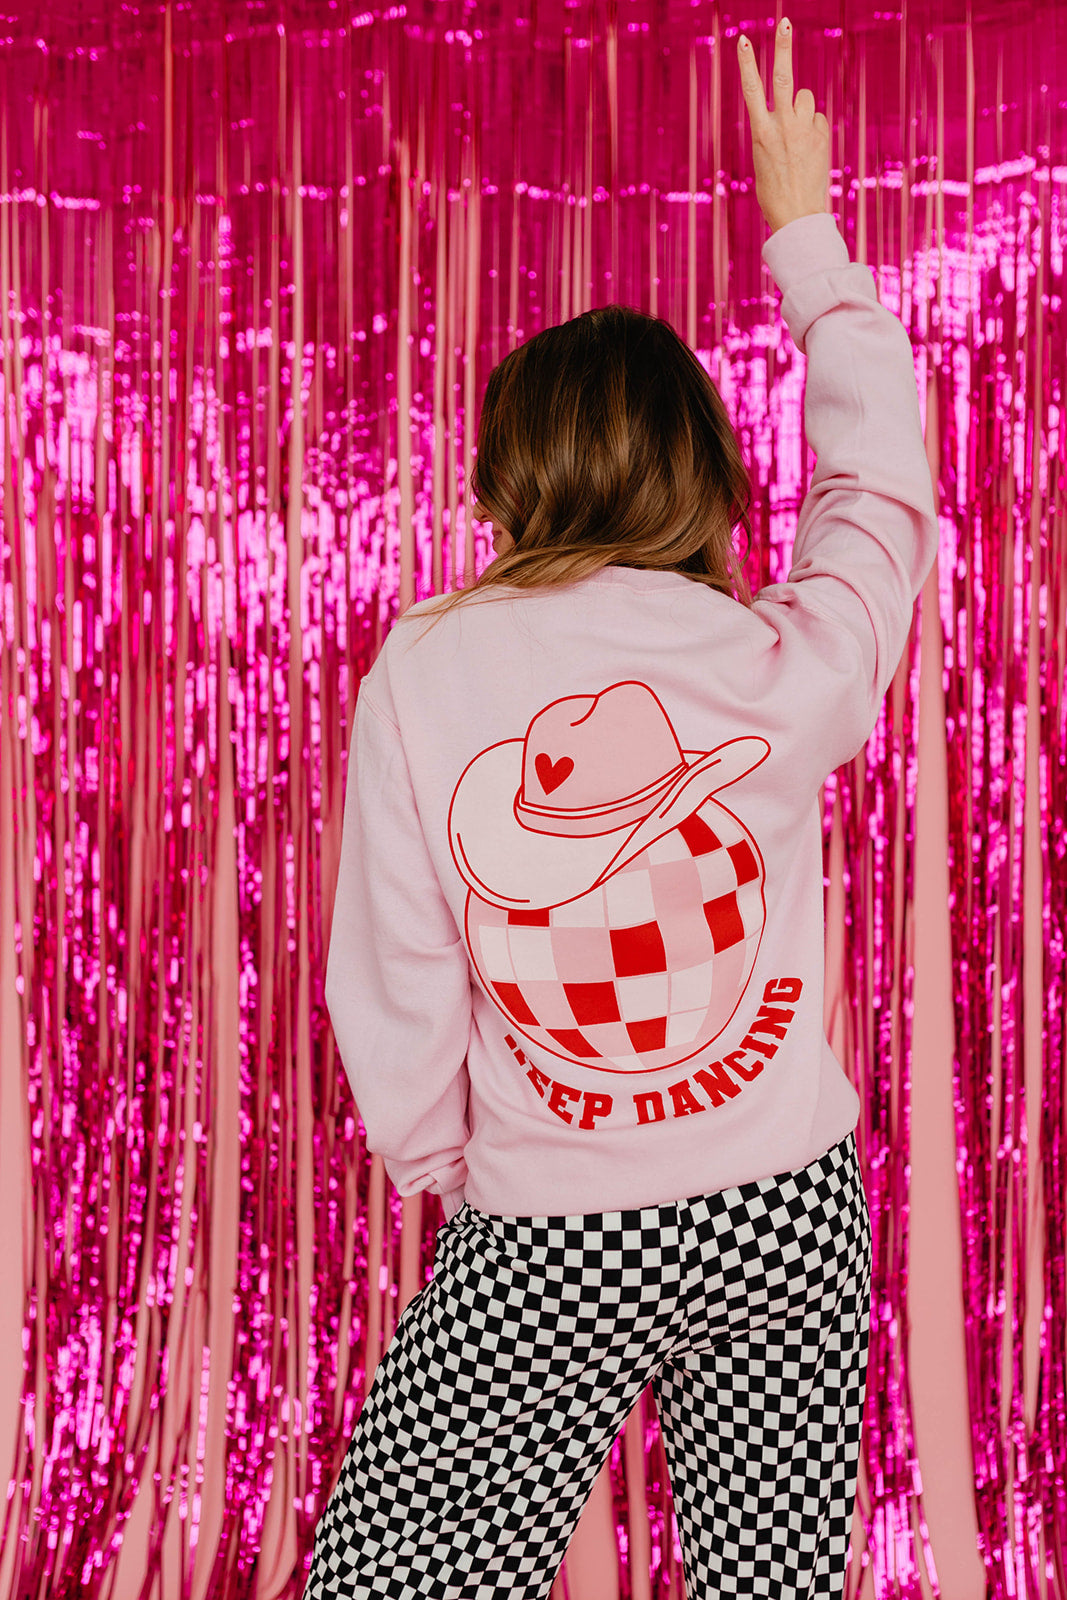 THE KEEP DANCING PULLOVER IN PINK BY PINK DESERT